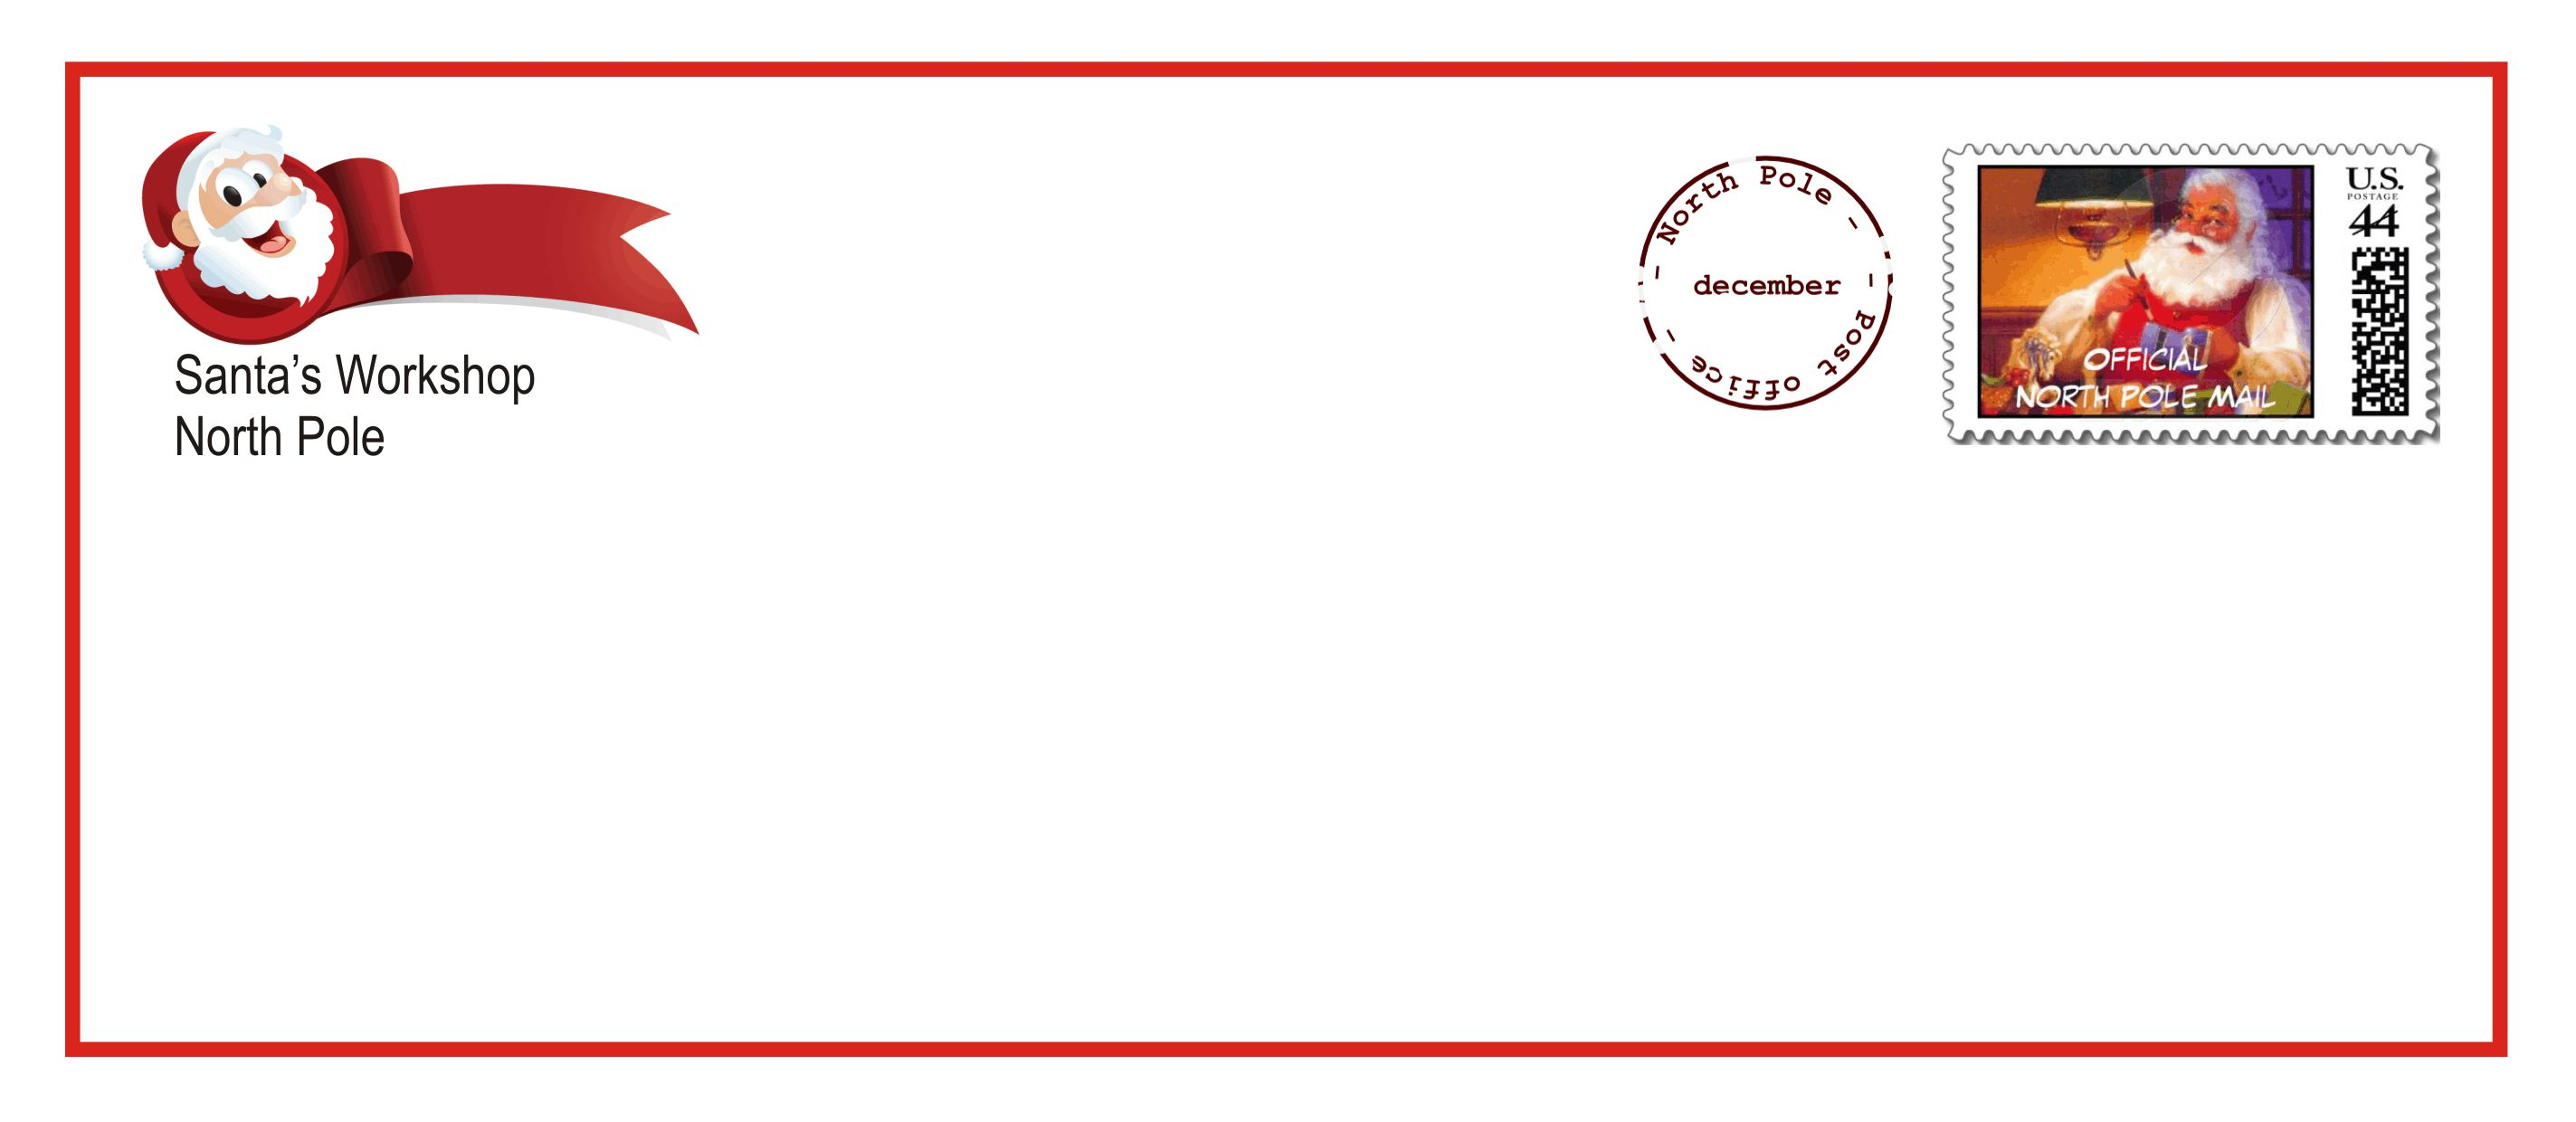 Santa Reply Letter Template - Printable Santa Letter Envelopes that E with the Upgraded Letter